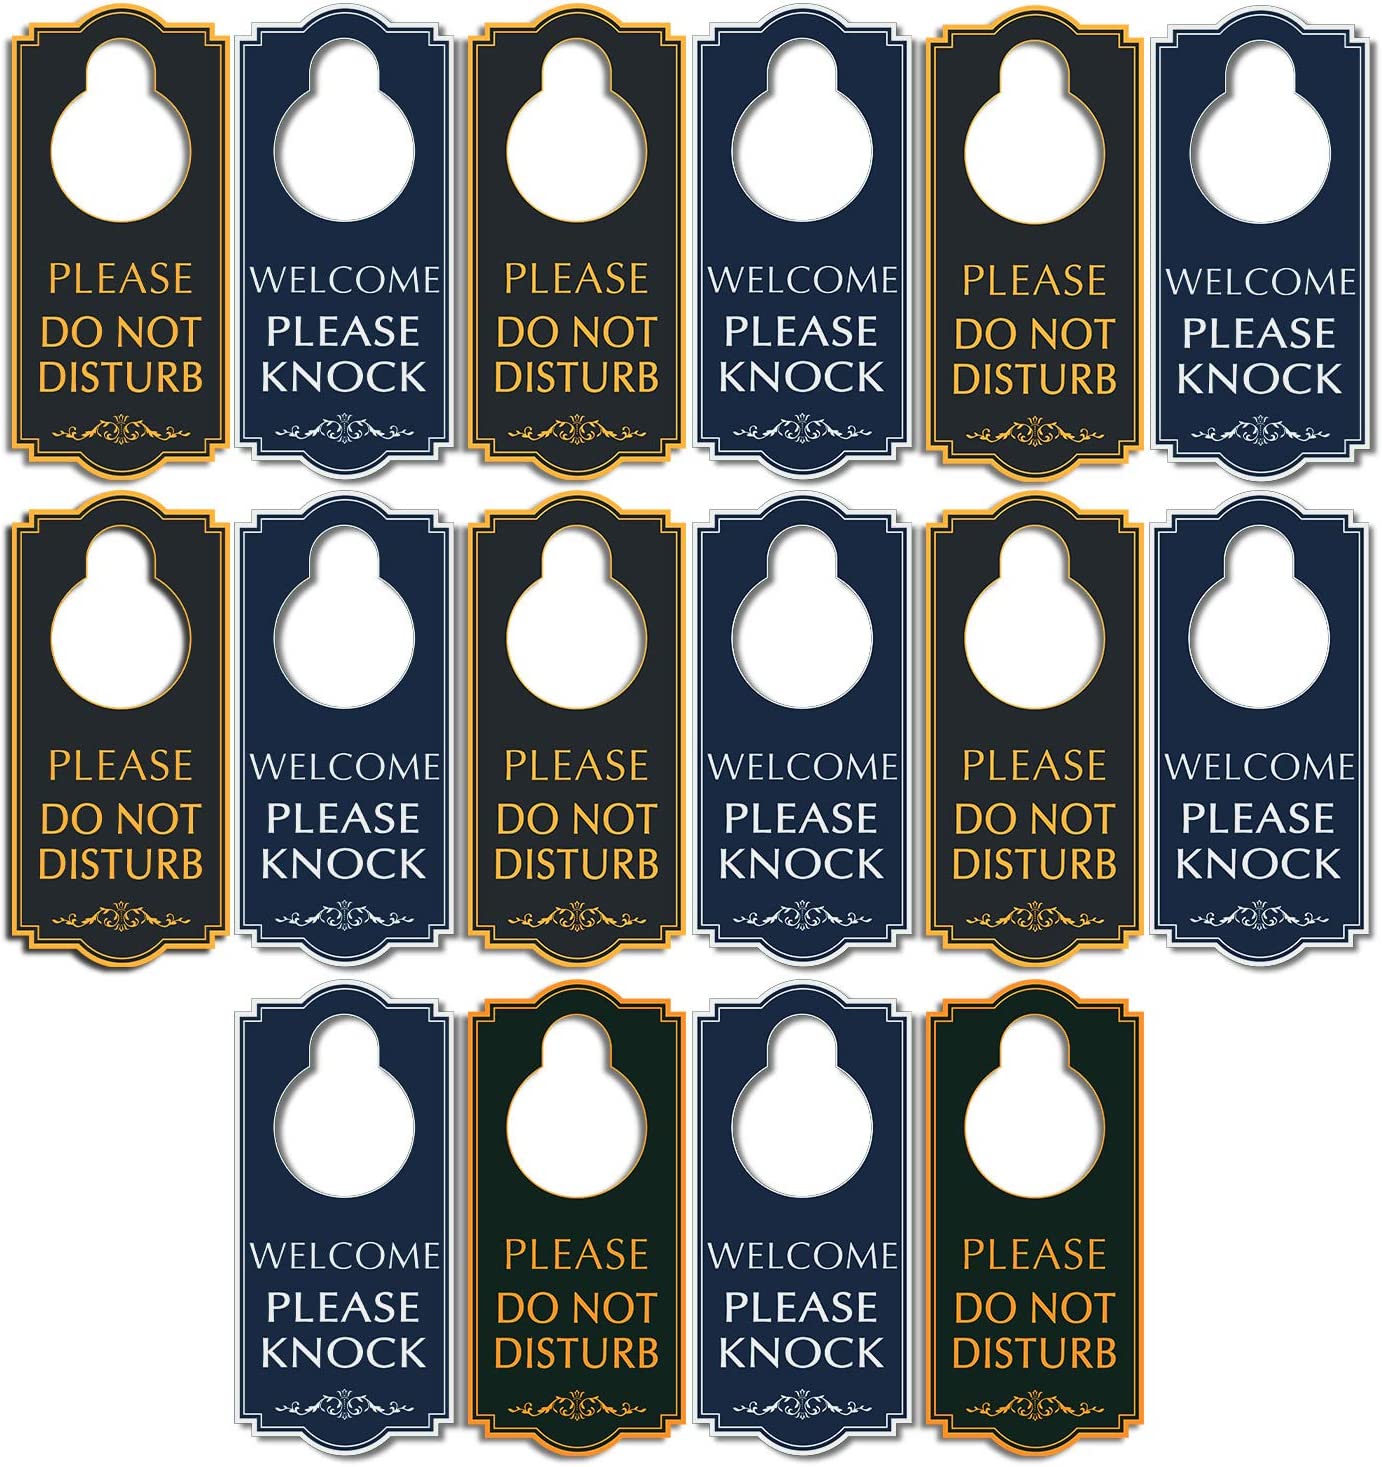 Do Not Disturb Door Hanger - Welcome Please Knock Door Sign, Black/Blue Double Sided, 4 x 9 inches PVC Plastic Perfect for Home, Clinic, Dorm, Hotel, Office, Spa, Law Firm, Massage